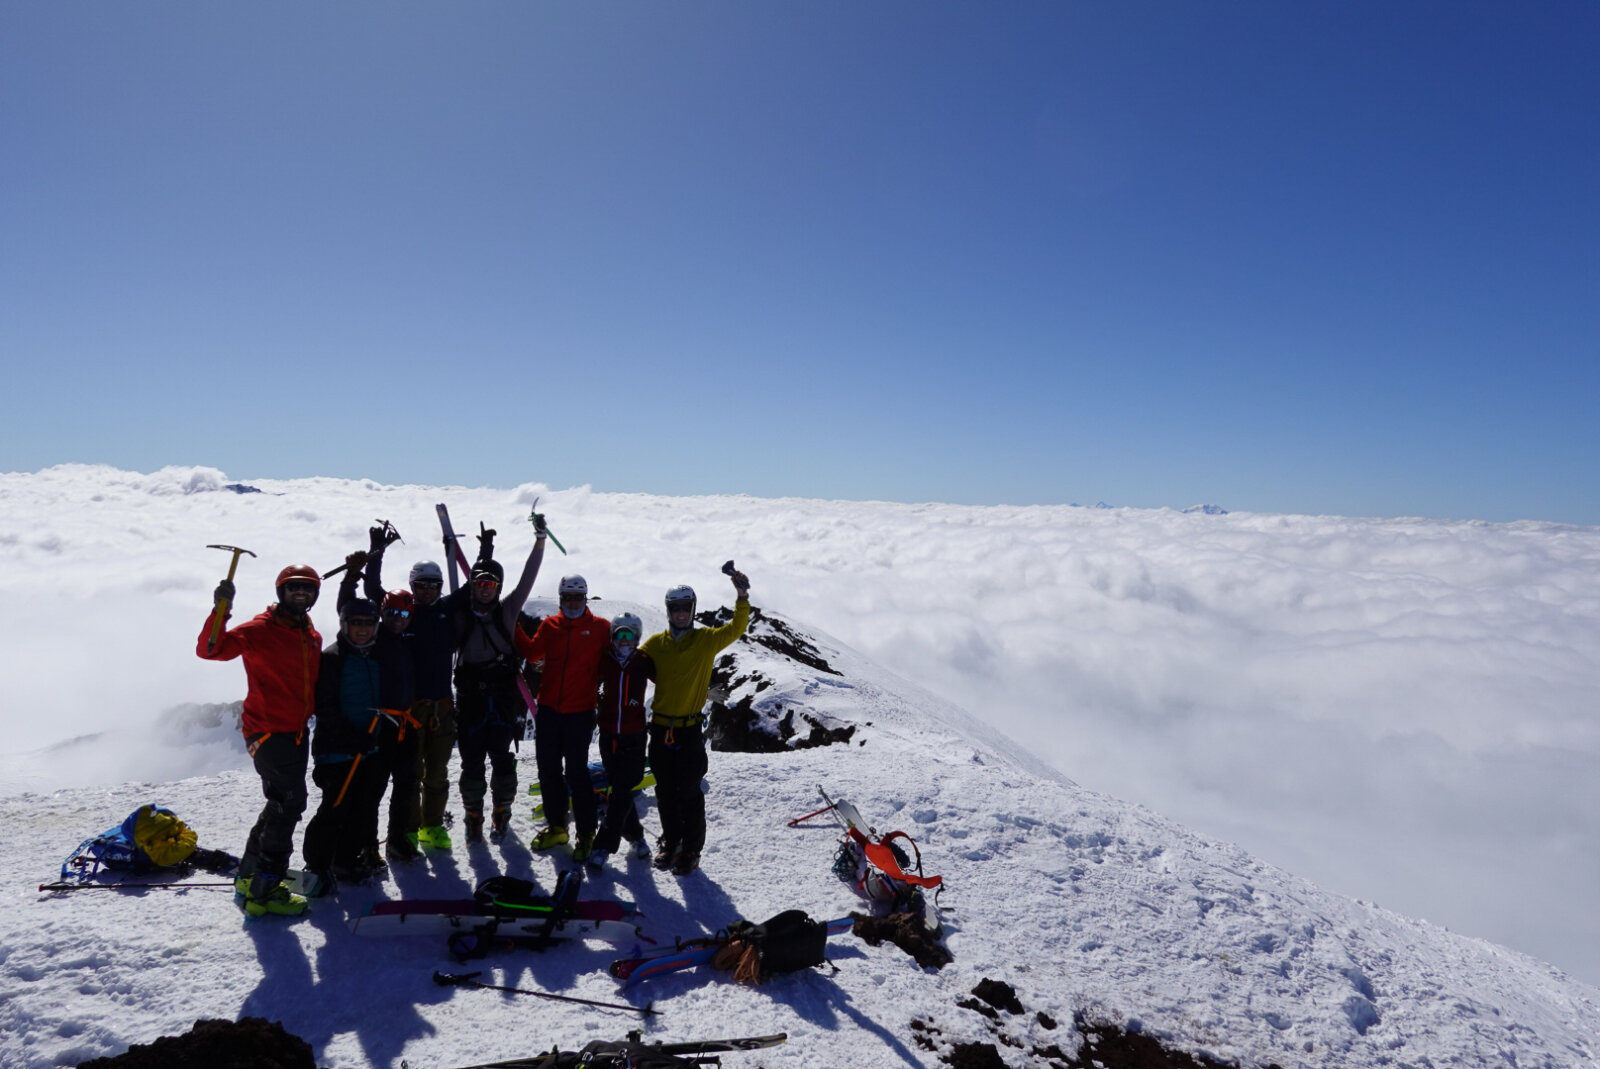 Professionally guided ski mountaineering trips in Chile.